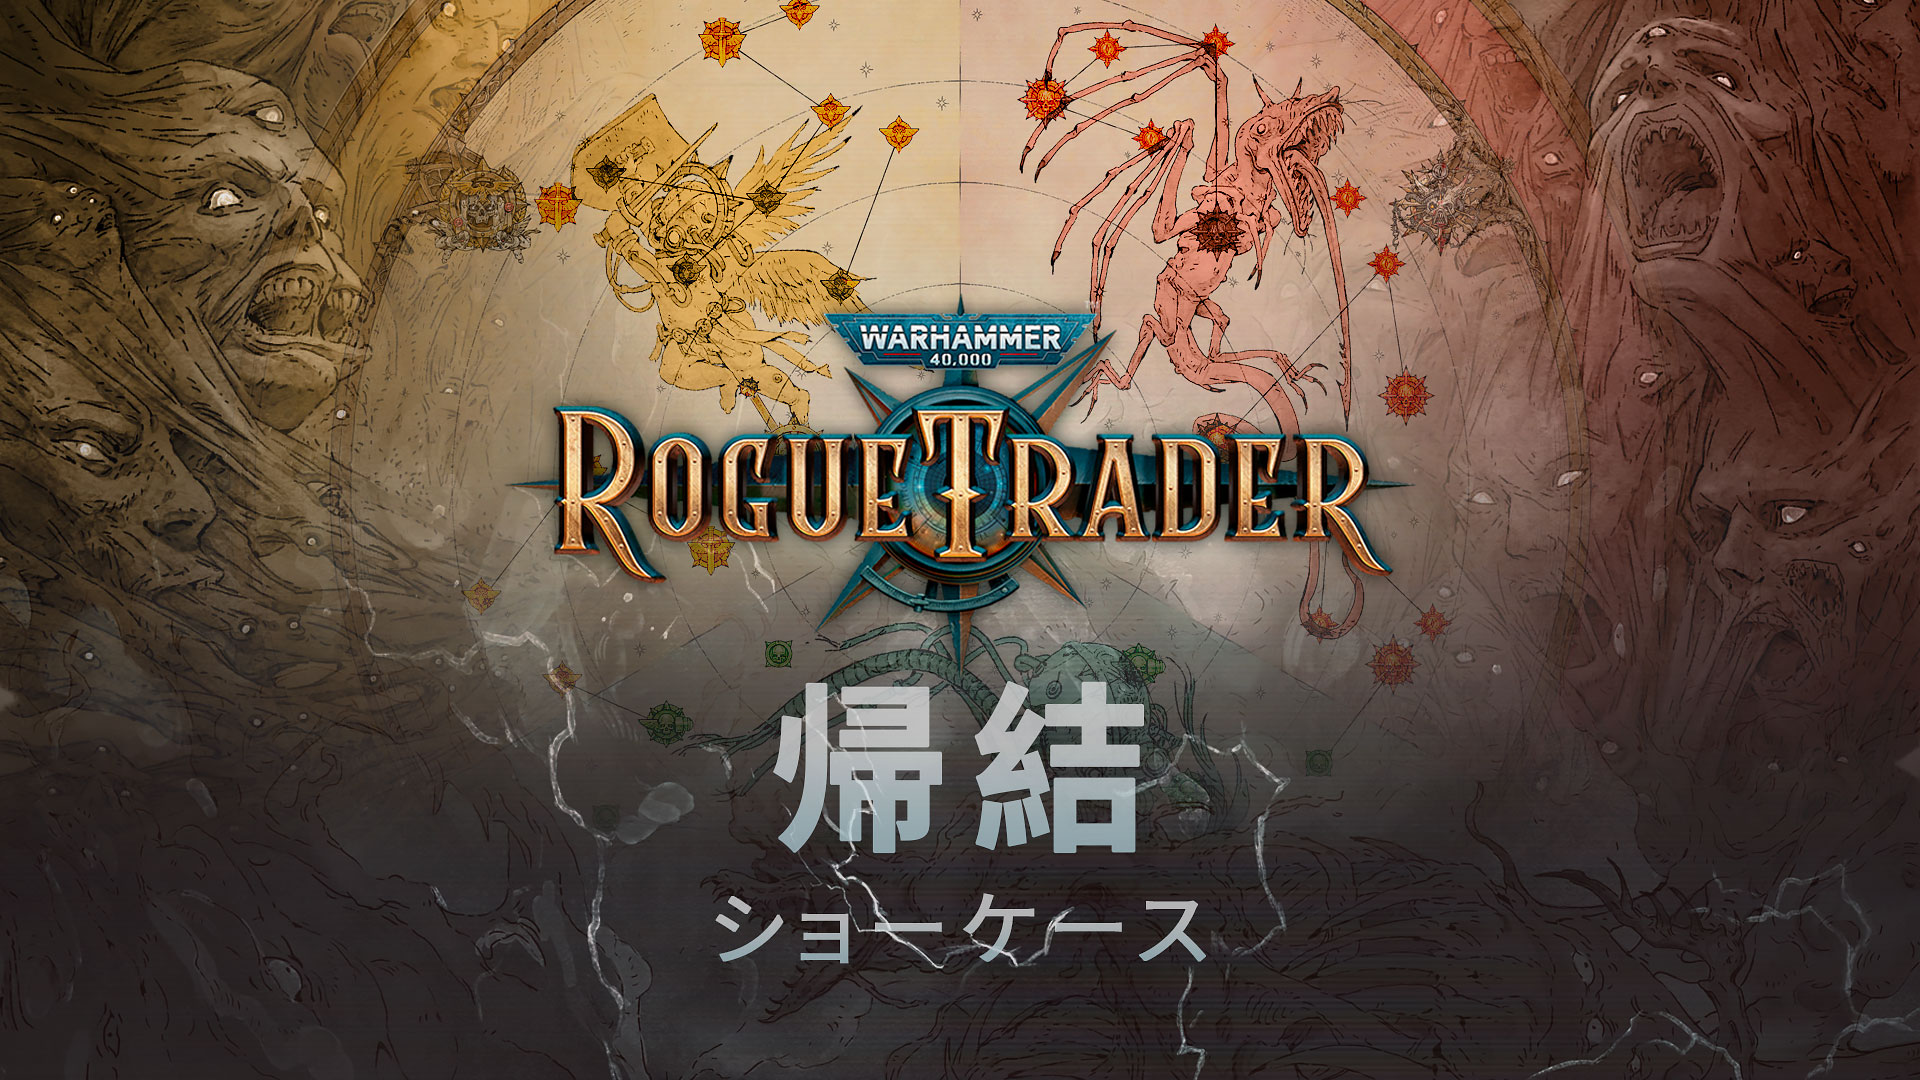 Owlcat Games we proudly announce that Warhammer 40000: Rogue Trader will also contain Japanese localization! In celebration, we created a Japanese version of the Consequences Showcase